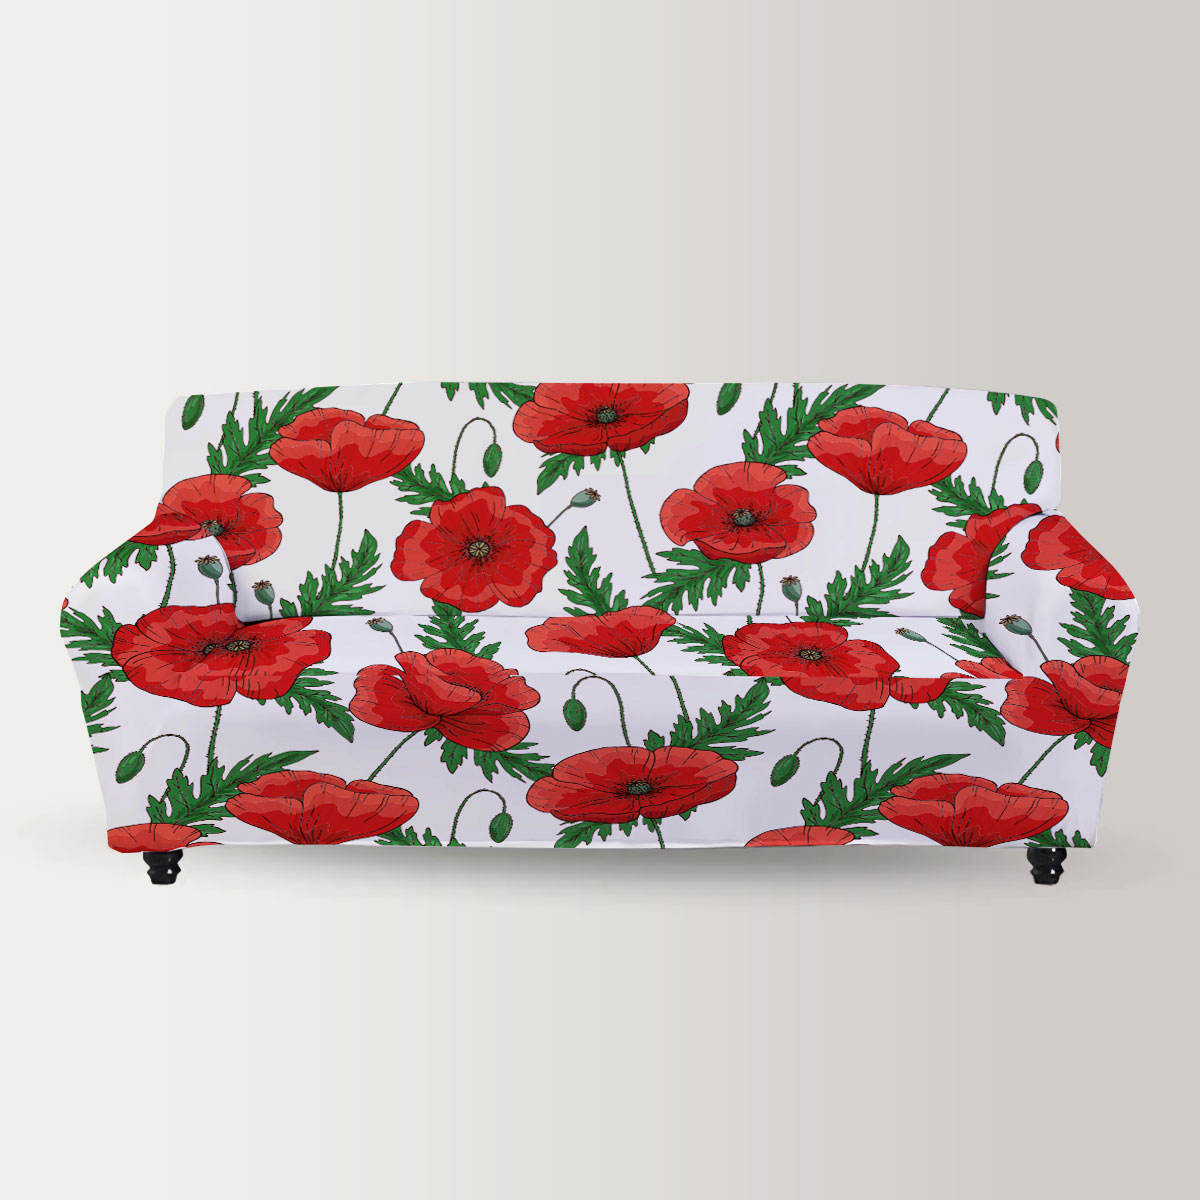 Red Poppies Flower Sofa Cover